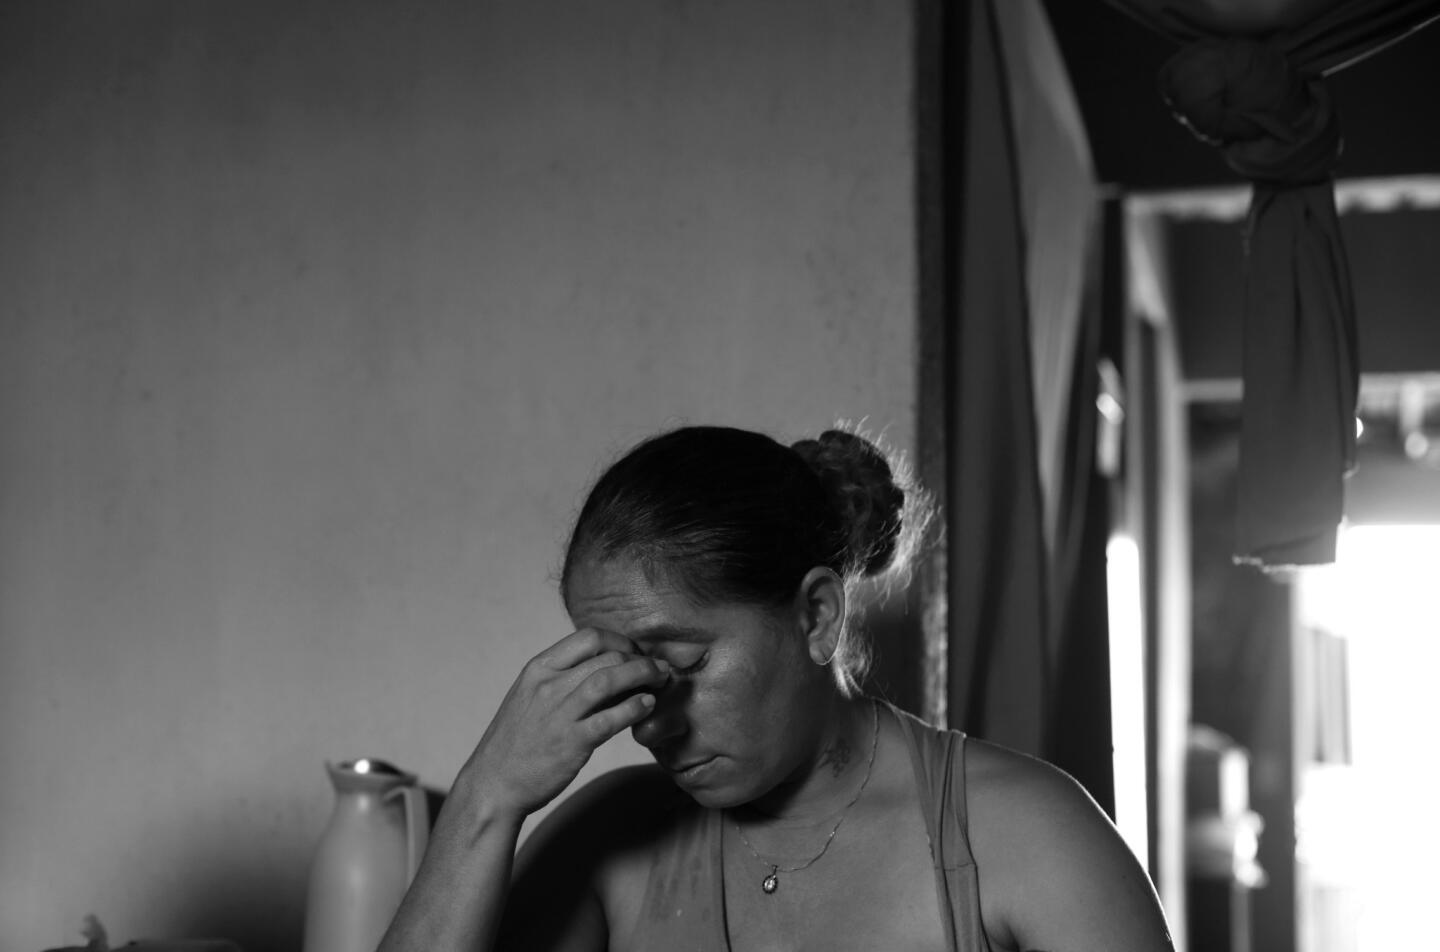 The day Josemary Gomes brought Gilberto home from hospital, she laid him on her bed and wept. When there were no tears left, she said, "I raised my head and carried on alone."